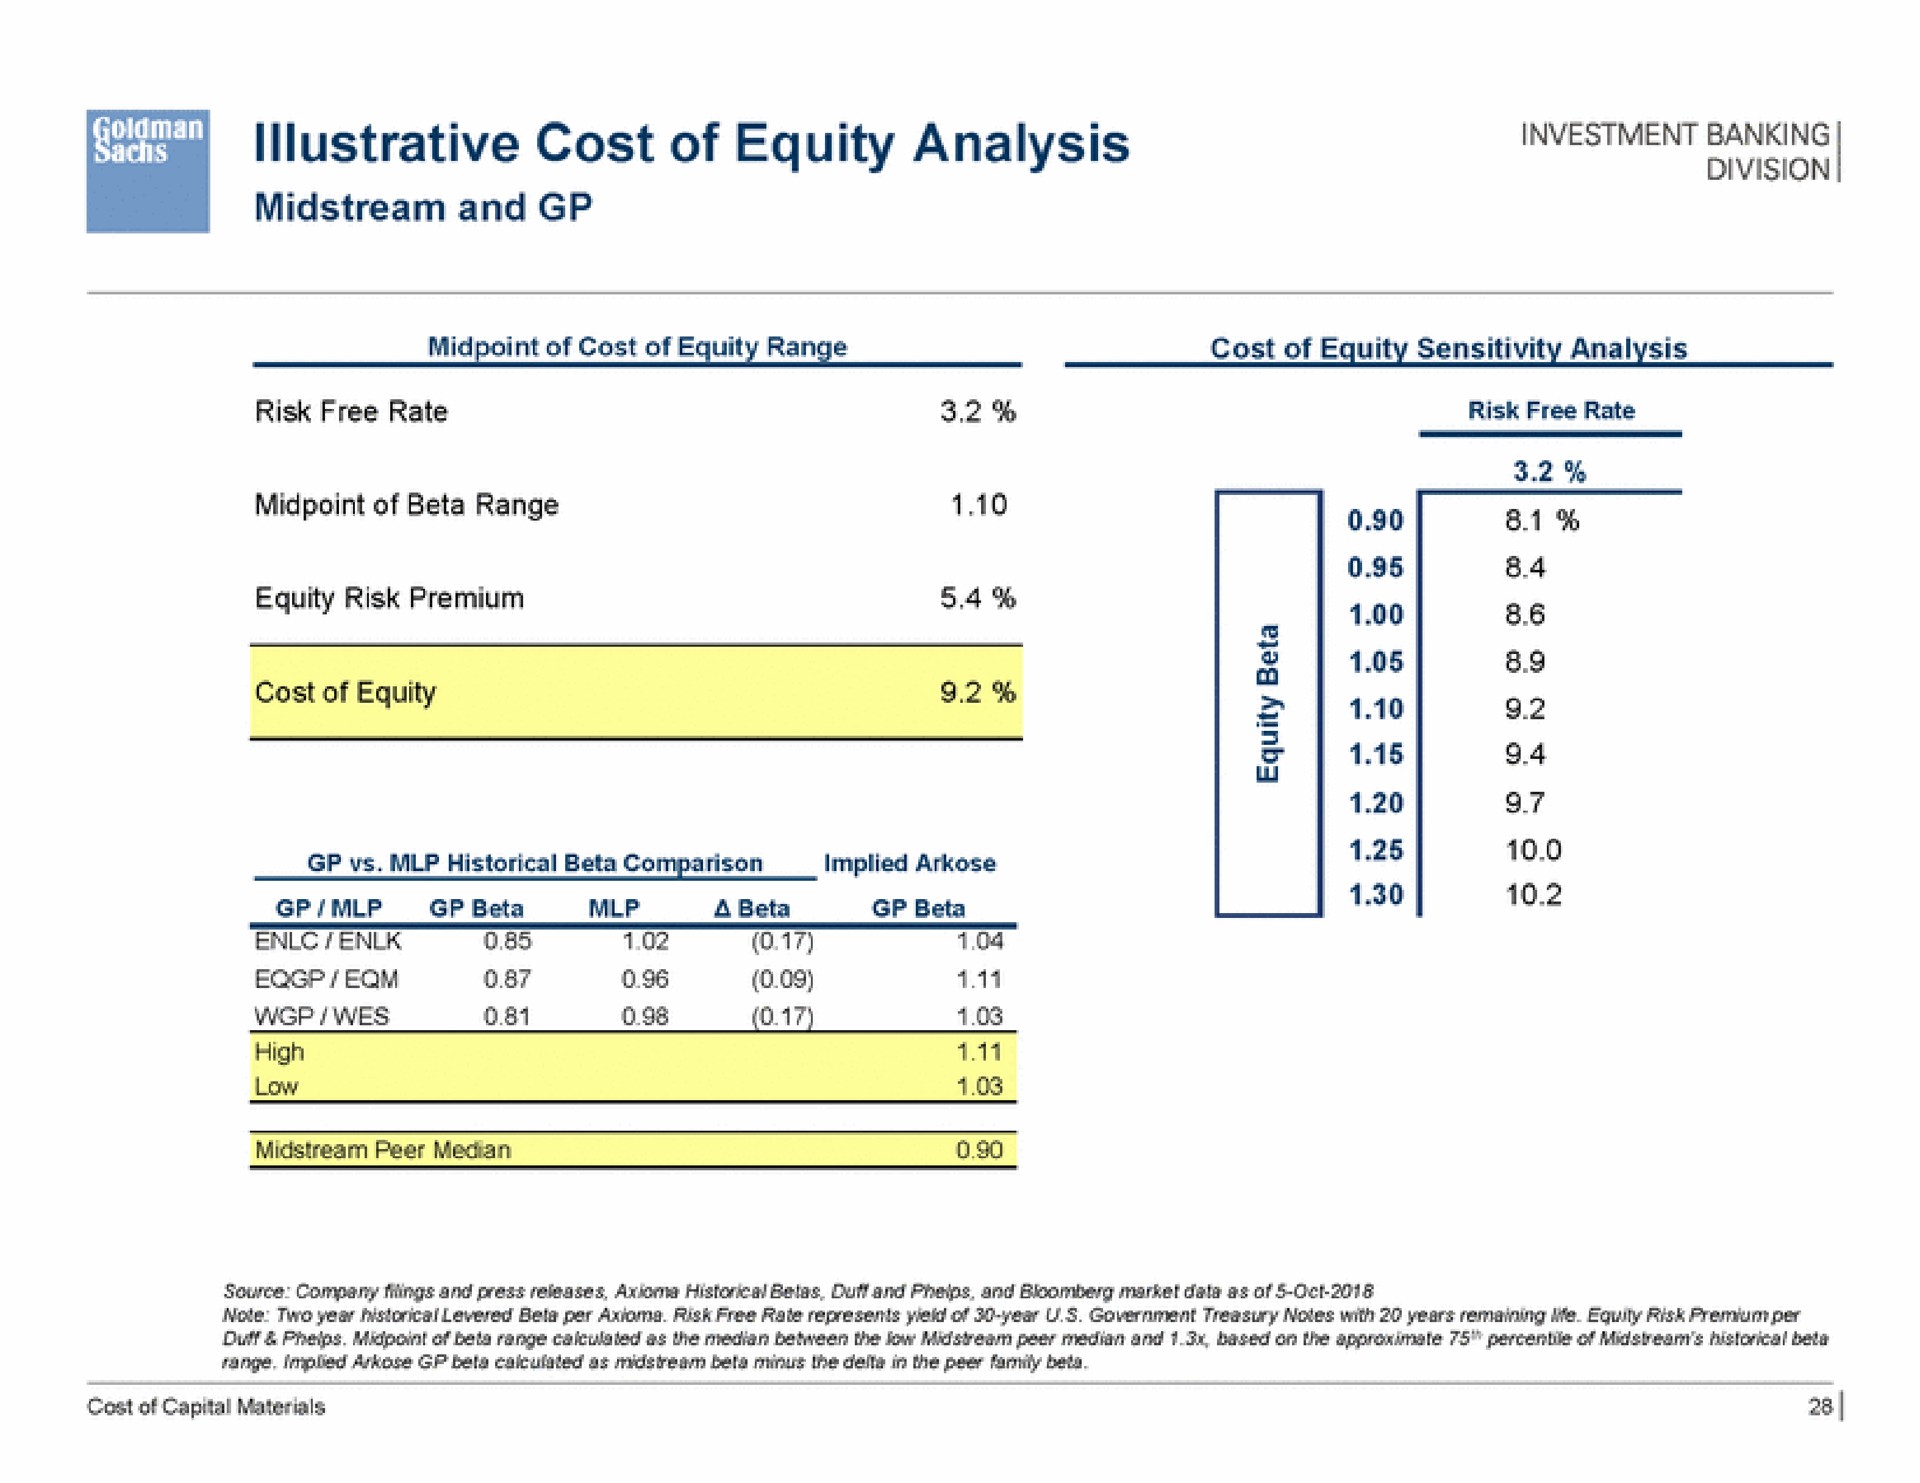 illustrative cost of equity analysis investment banking | Goldman Sachs